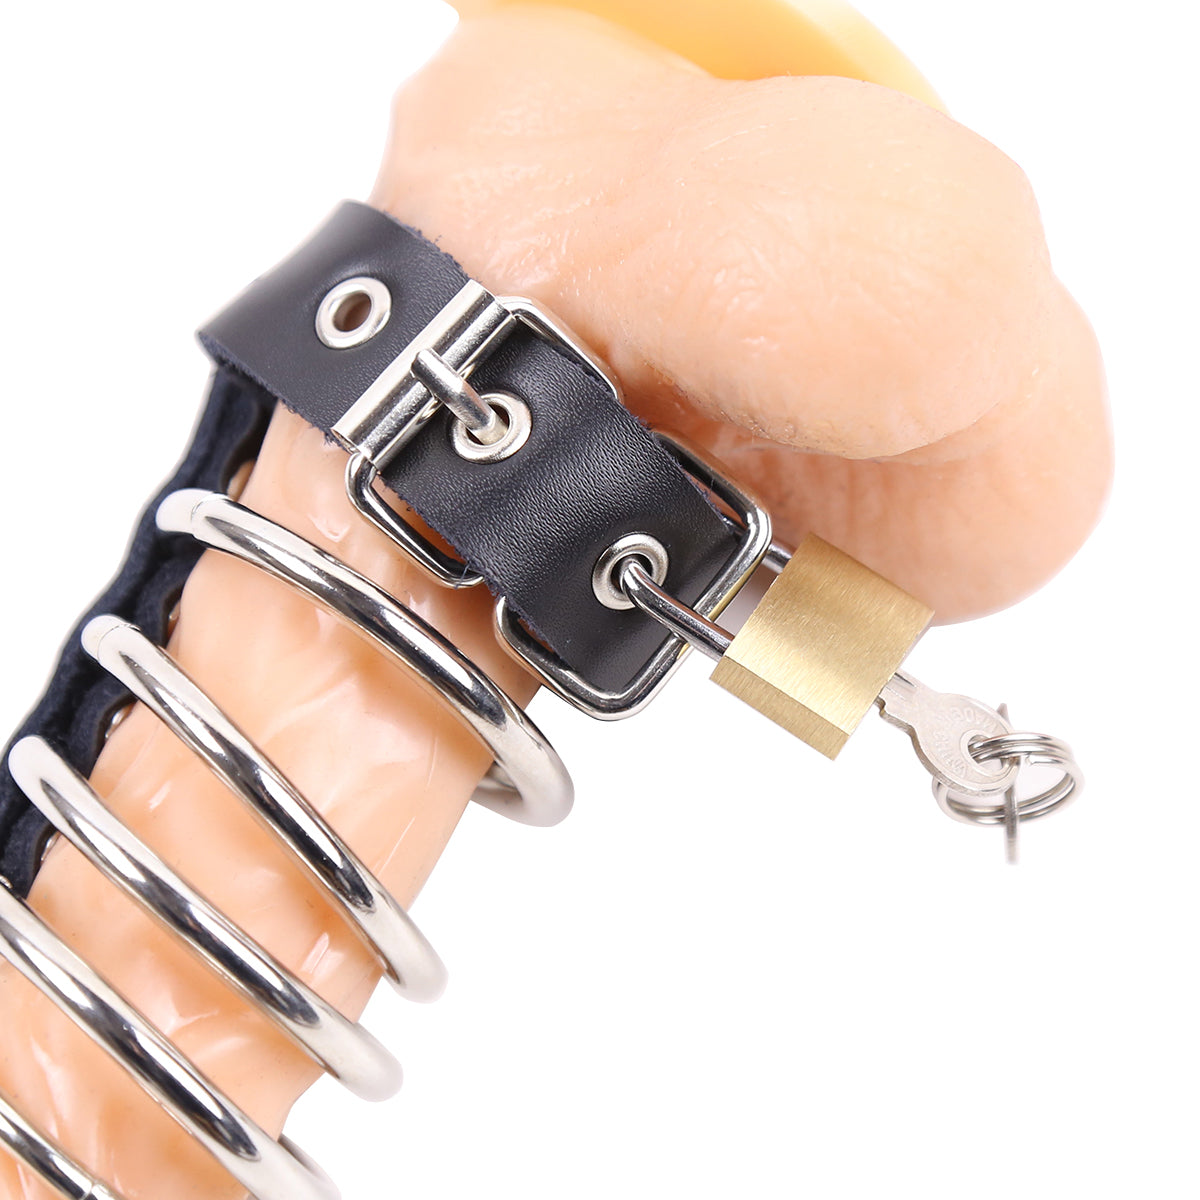 'The Sub' Lockable Leather and Steel Chastity Cage